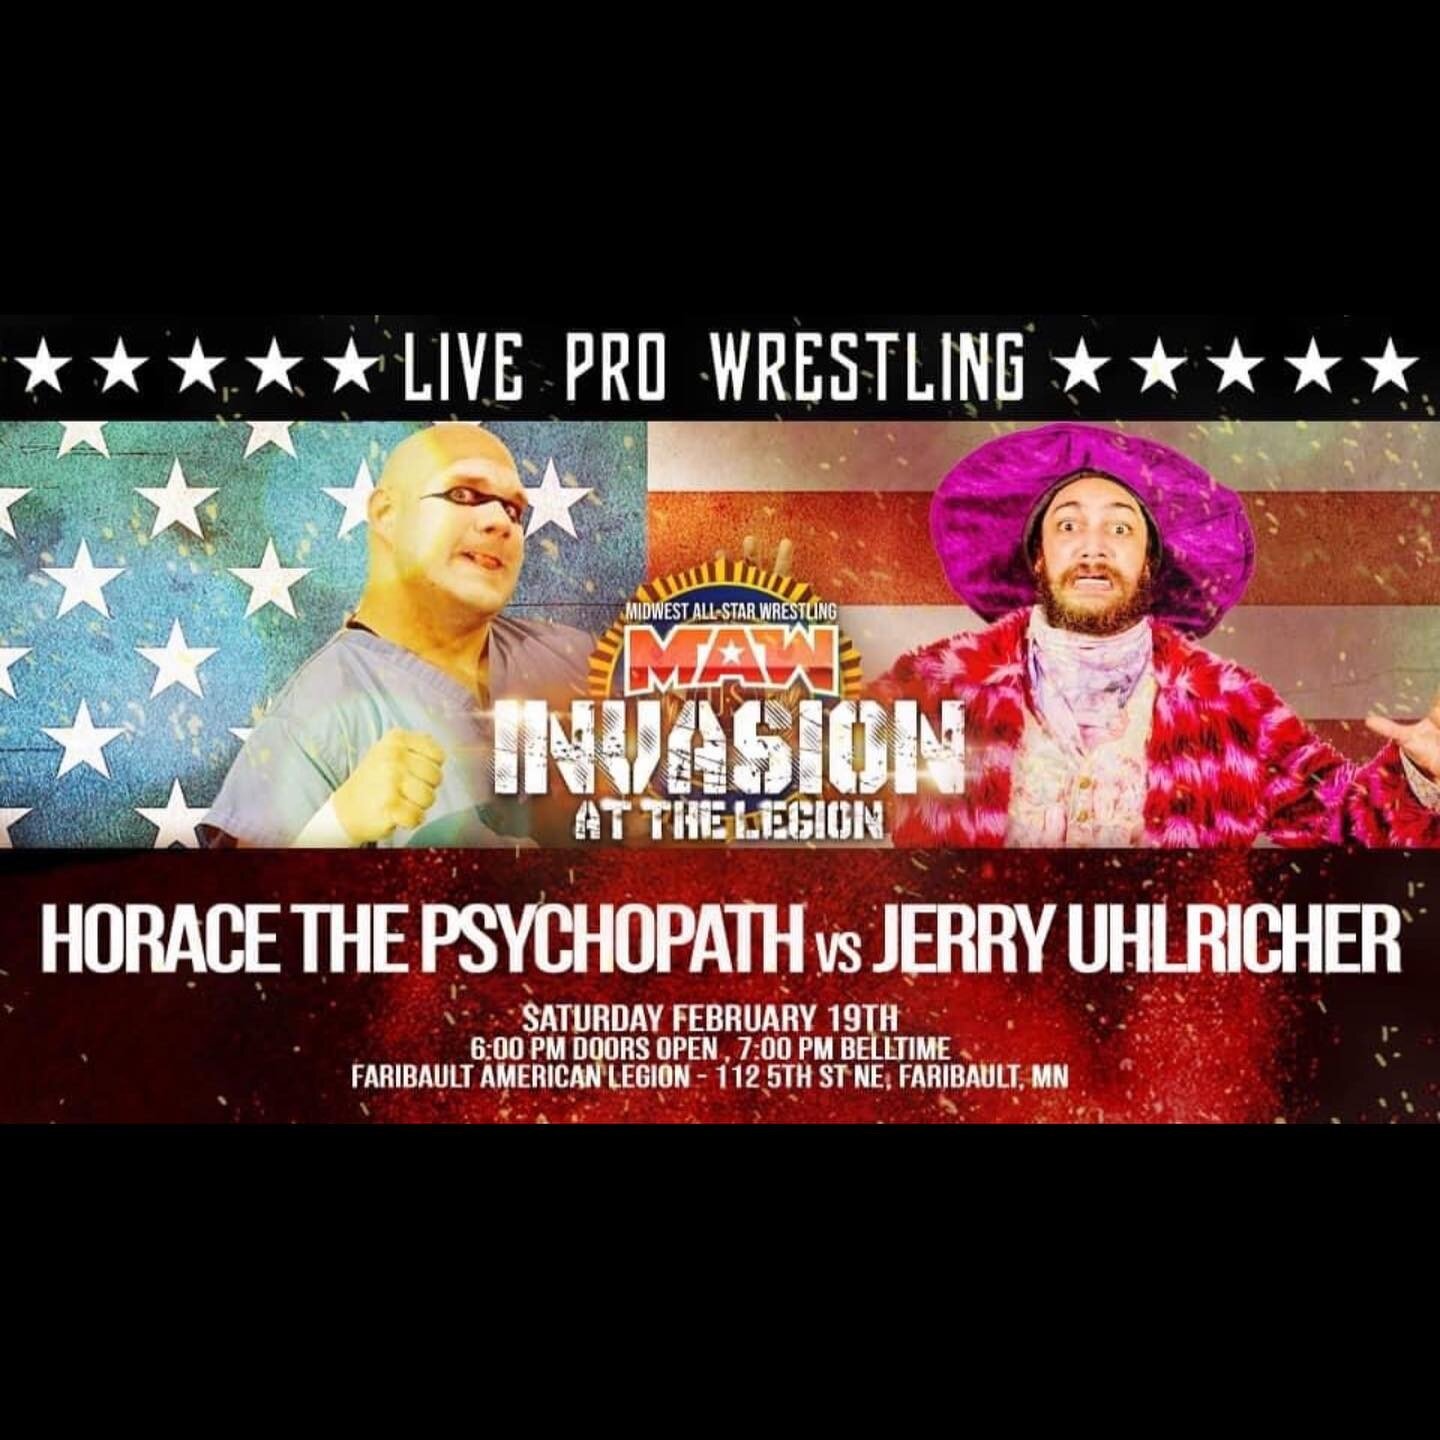 Yes! That&rsquo;s right, this Saturday February 19th @mw_allstar returns to Faribault MN, for an Invasion at the Legion! Horace the Psychopath better watch out for Jerry the Make Believe I&rsquo;ll tell ya that for free!
🛎
🛎
🛎
#makebelievejerry #j